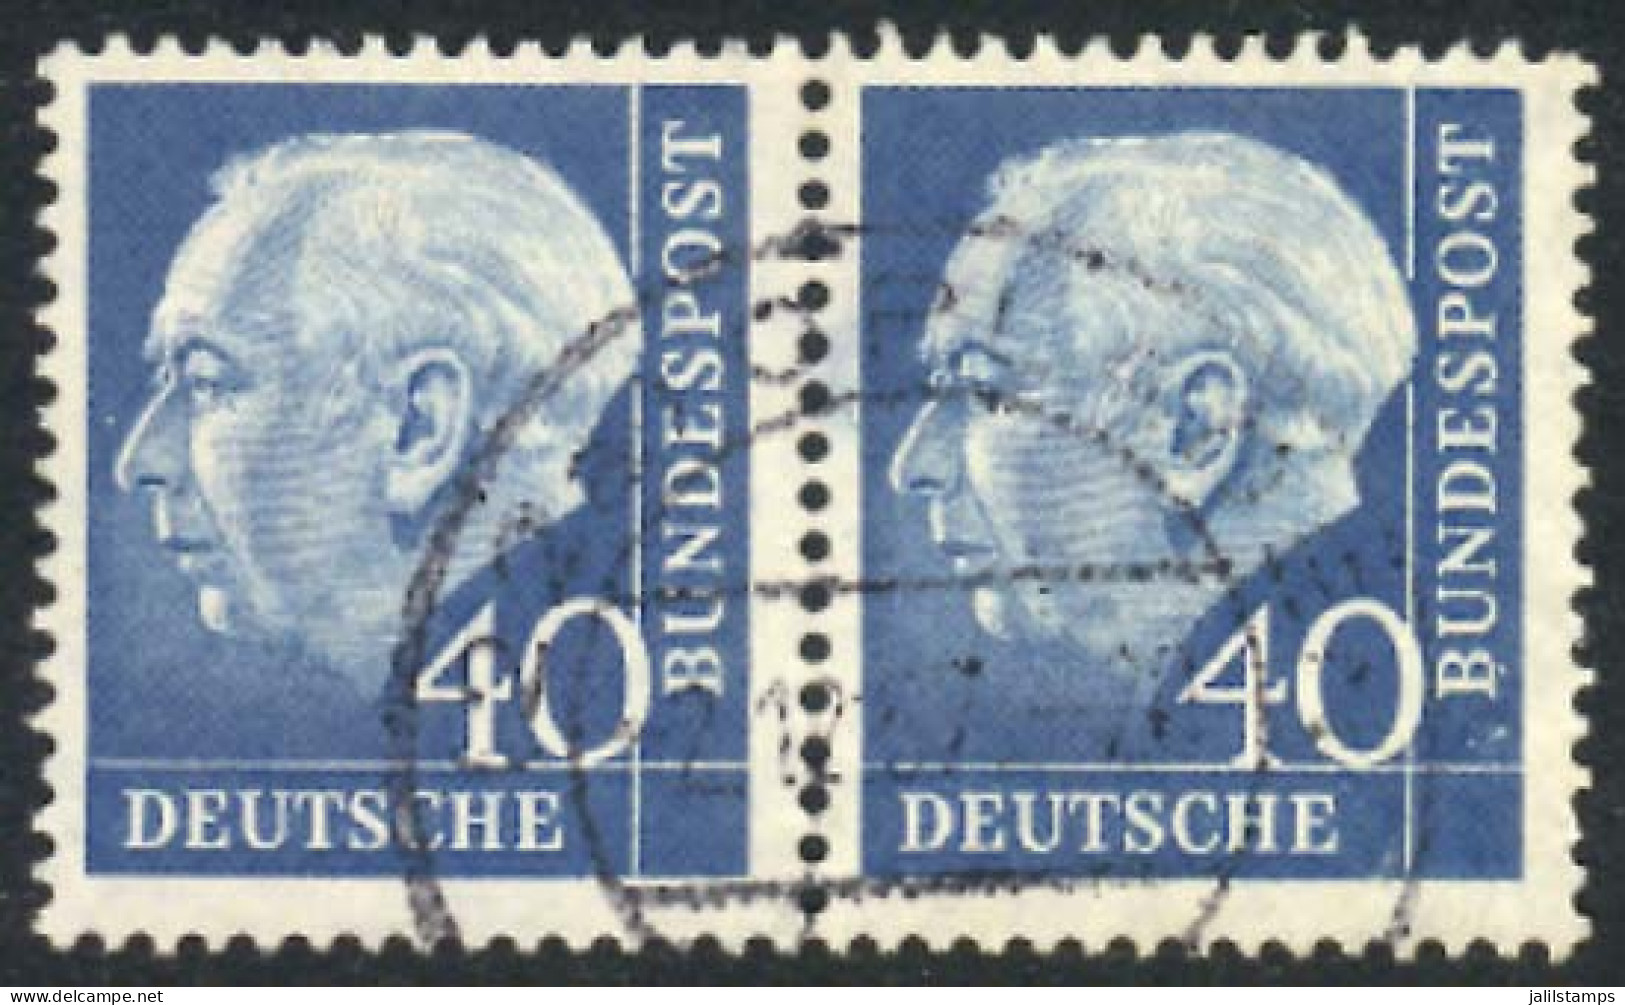 WEST GERMANY: Michel 260x, Used HORIZONTAL Pair, Fine Quality, Catalog Value Euros 200, Low Start! - Usados